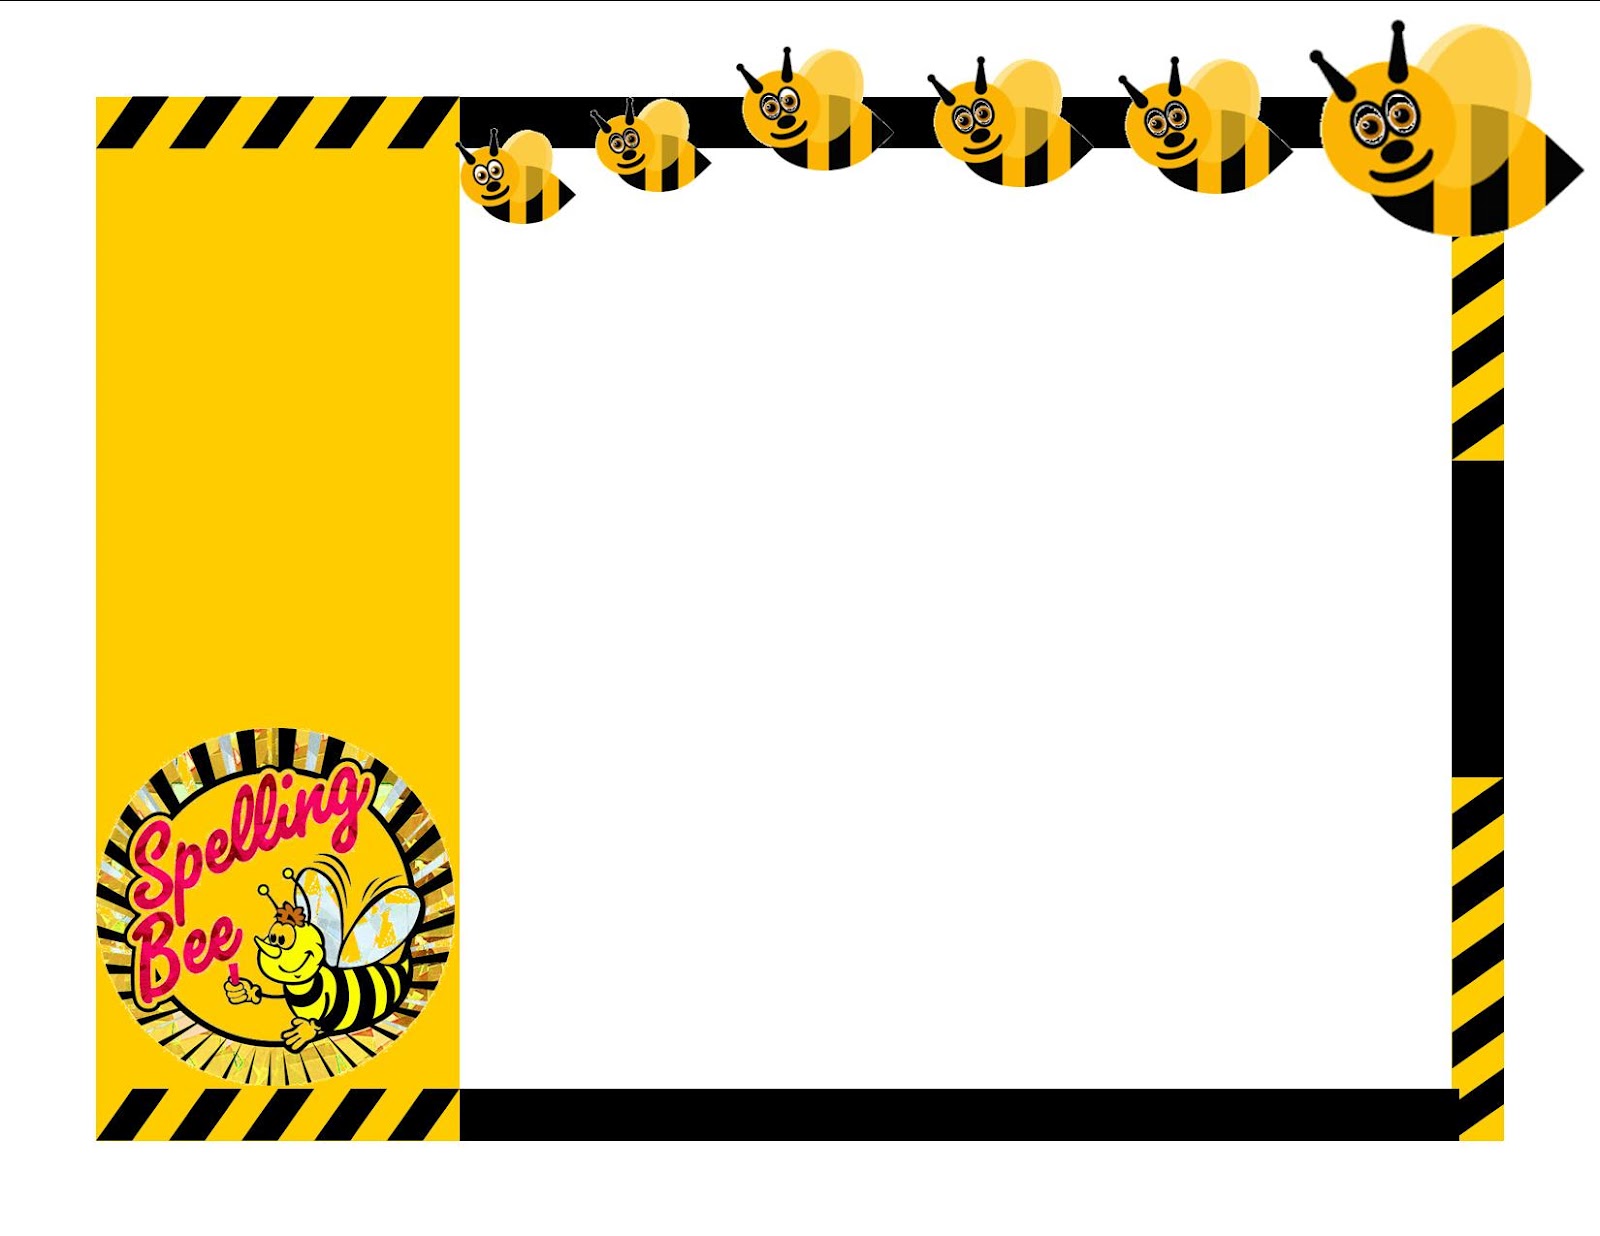 buzzing-with-style-bee-border-clipart-collection